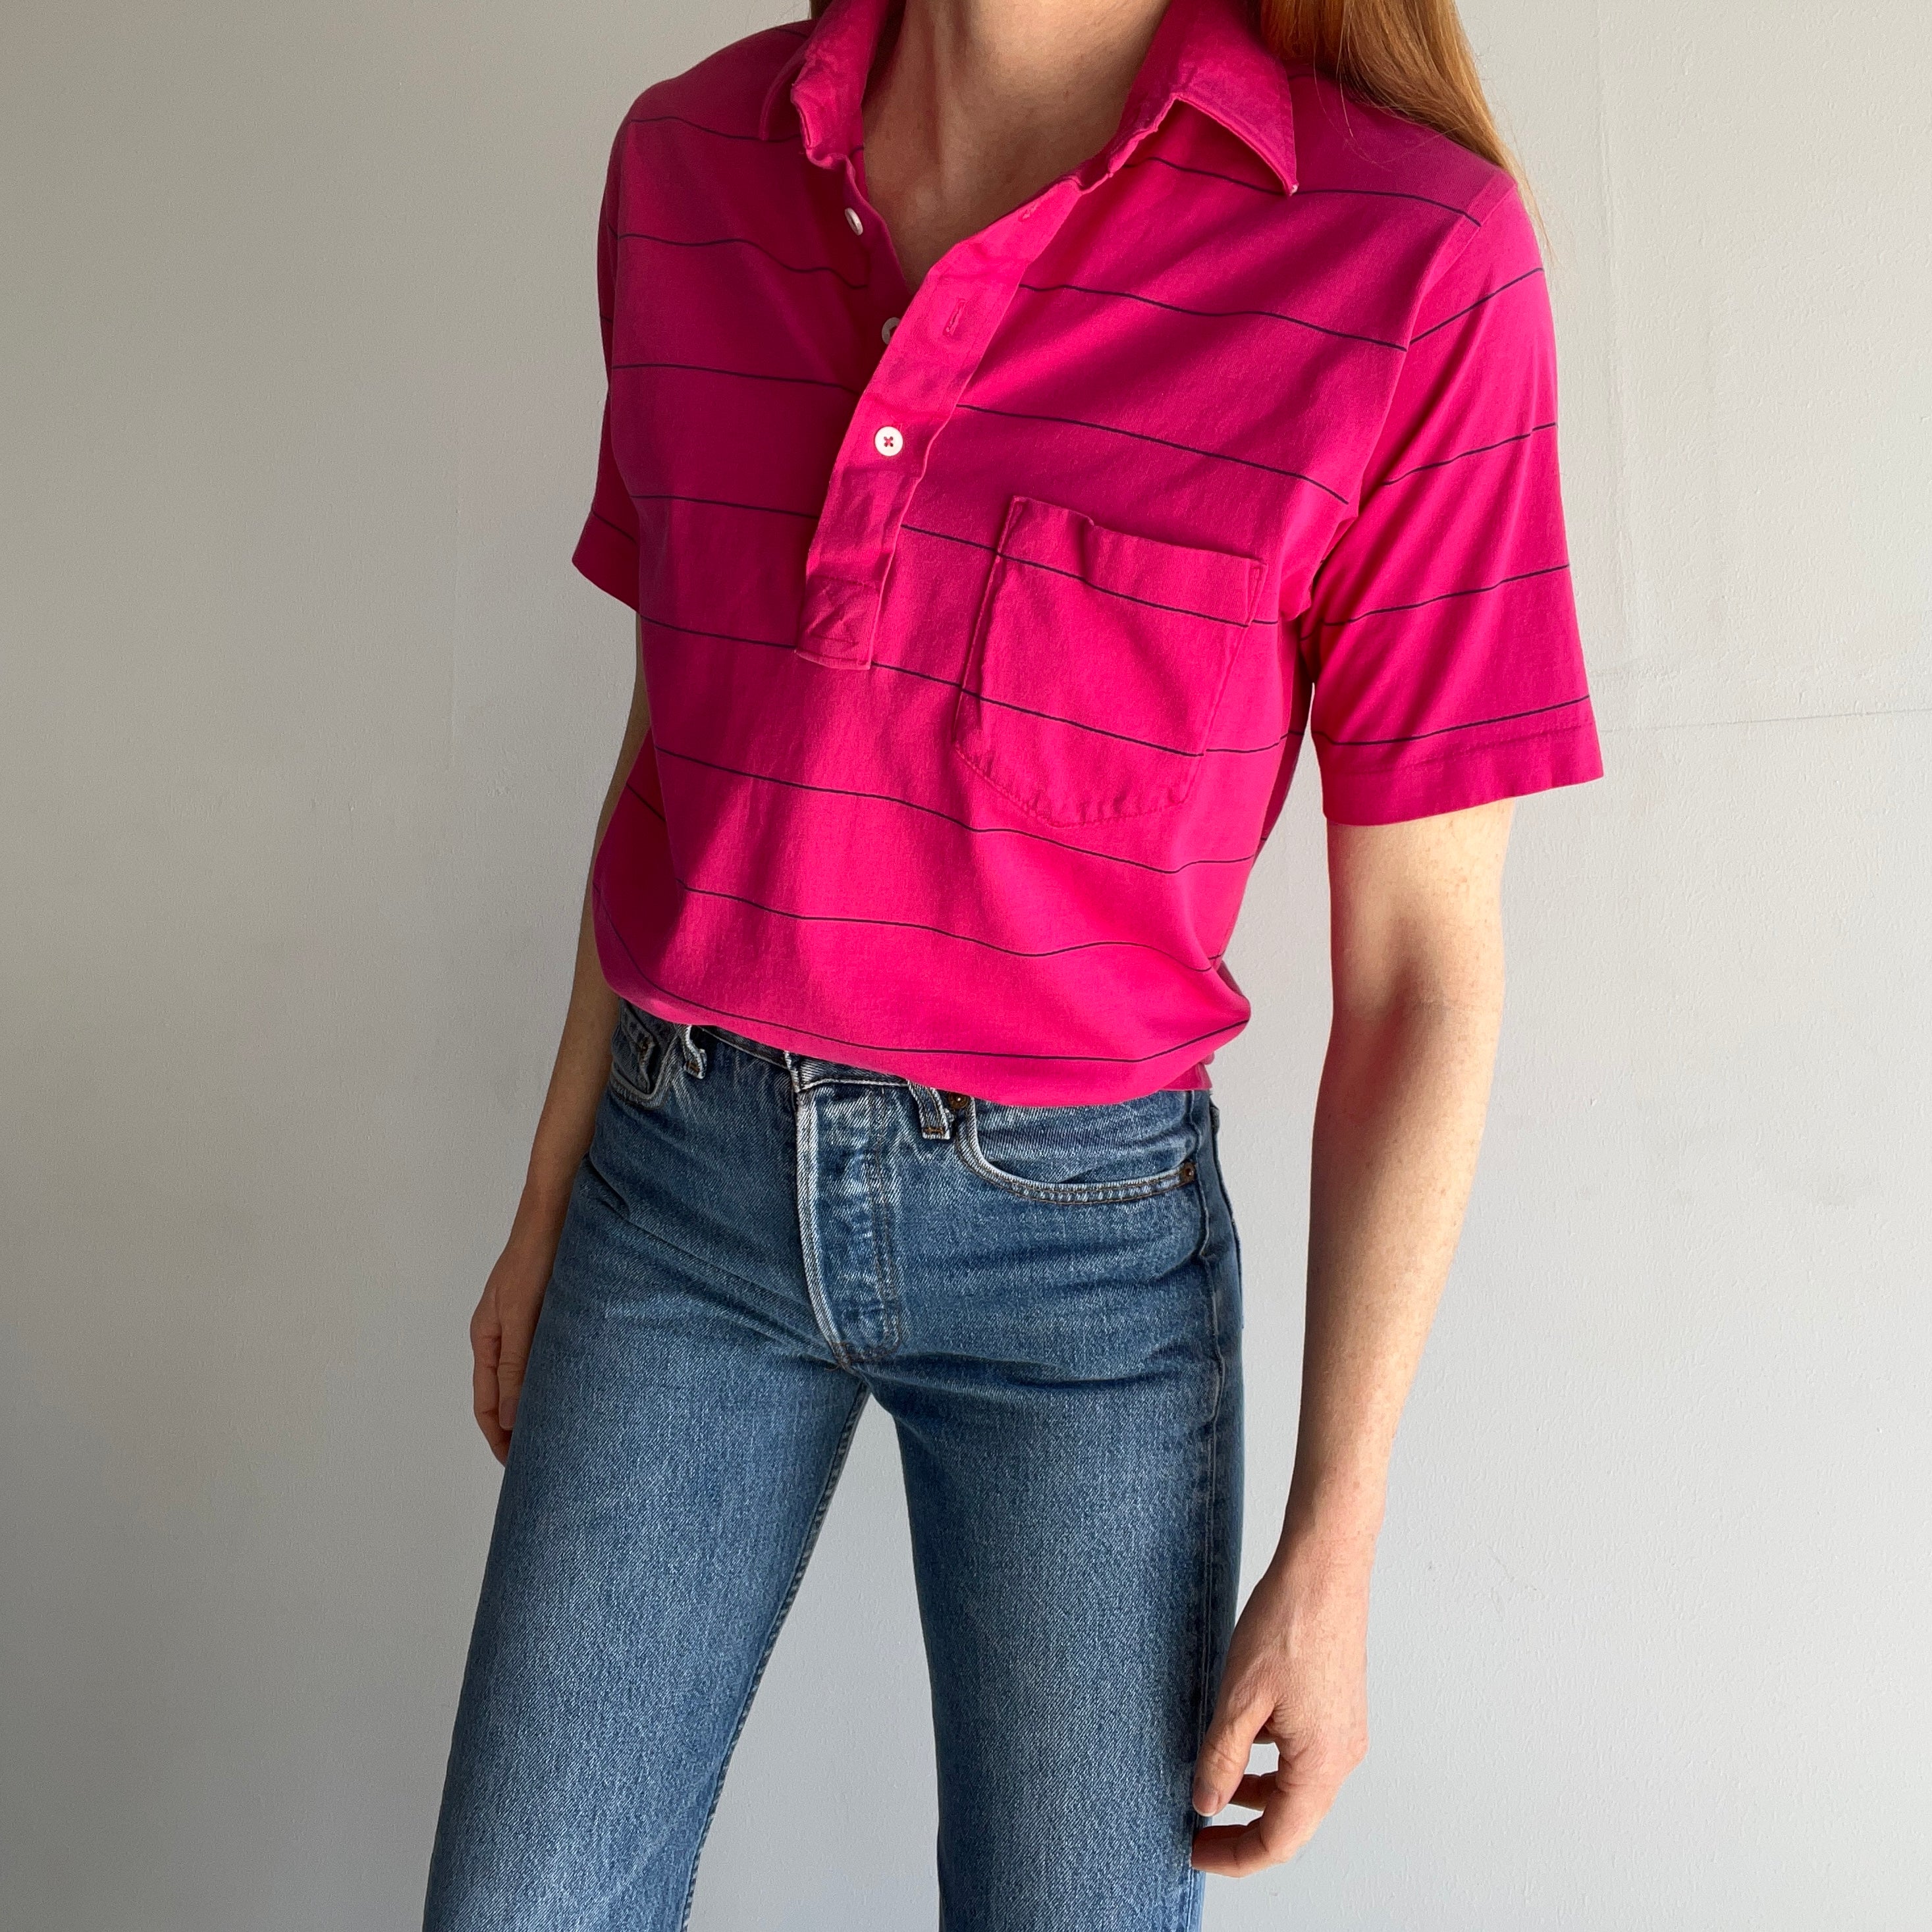 1980s Silky Soft Jello Pink T-Shirt with a Cool Collar